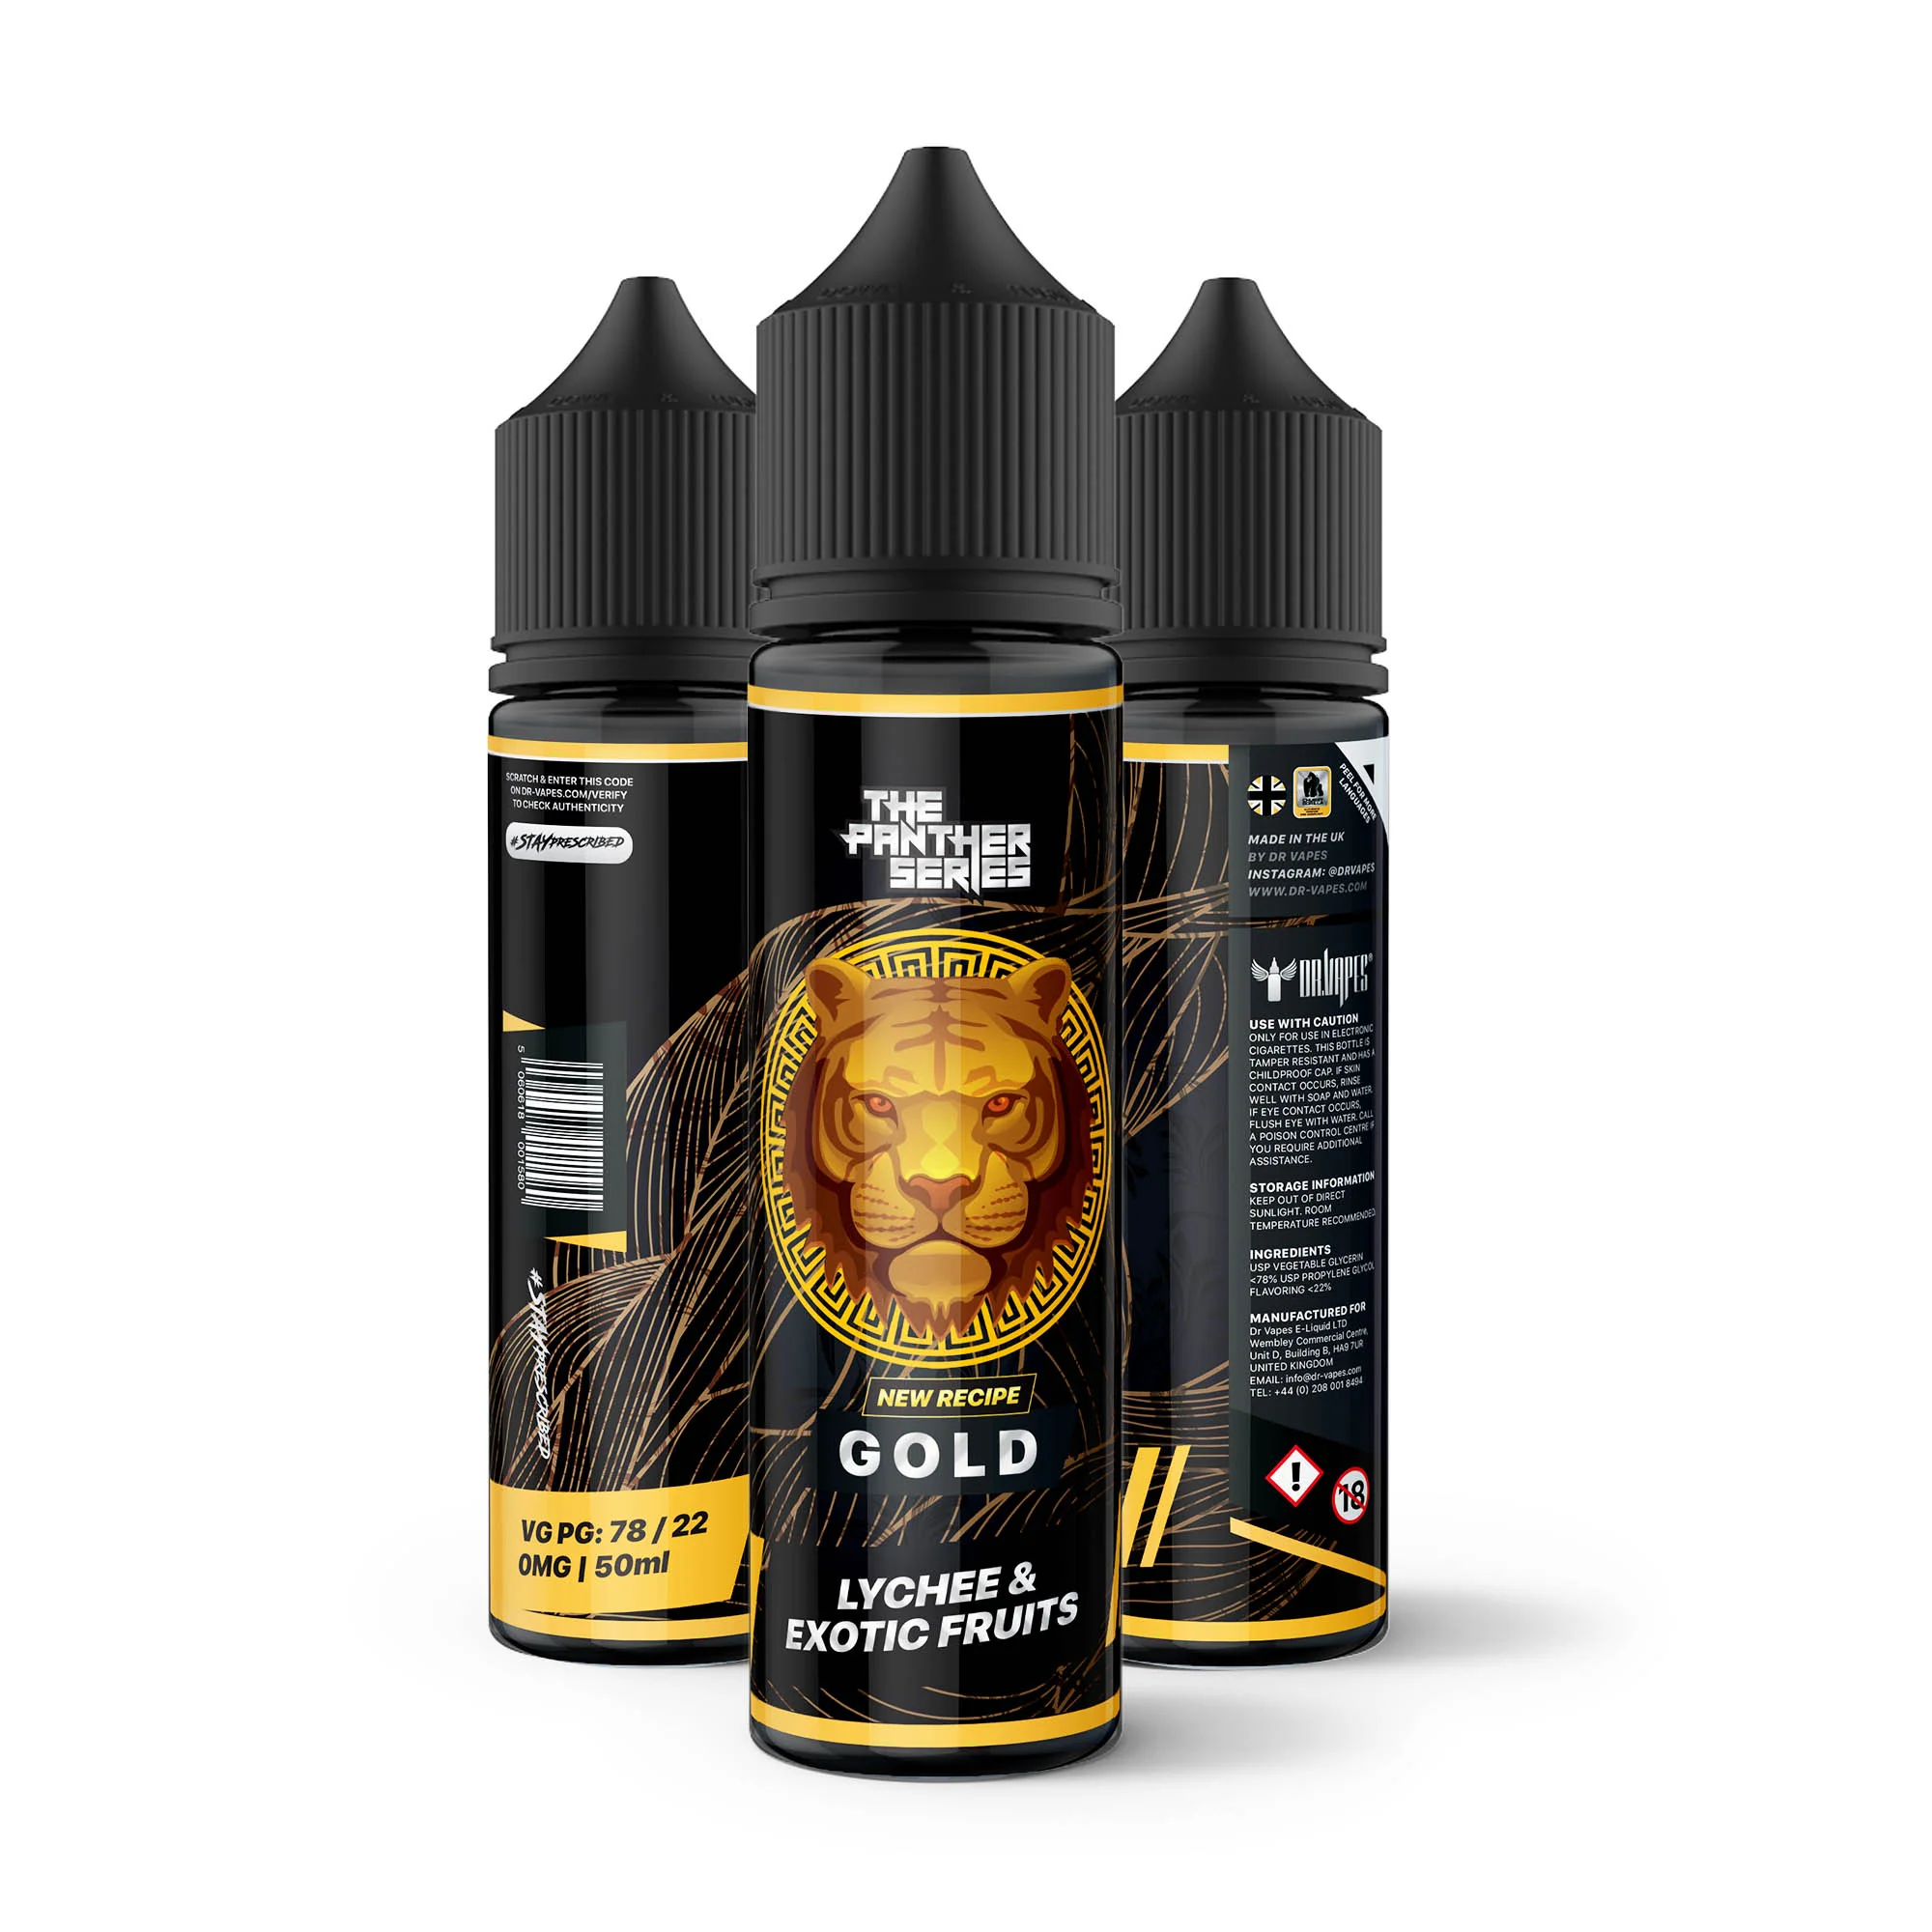 DR VAPE THE PANTHER SERIES GOLD (LITCHI & FRUITS) 60ML NICOTINE 3MG